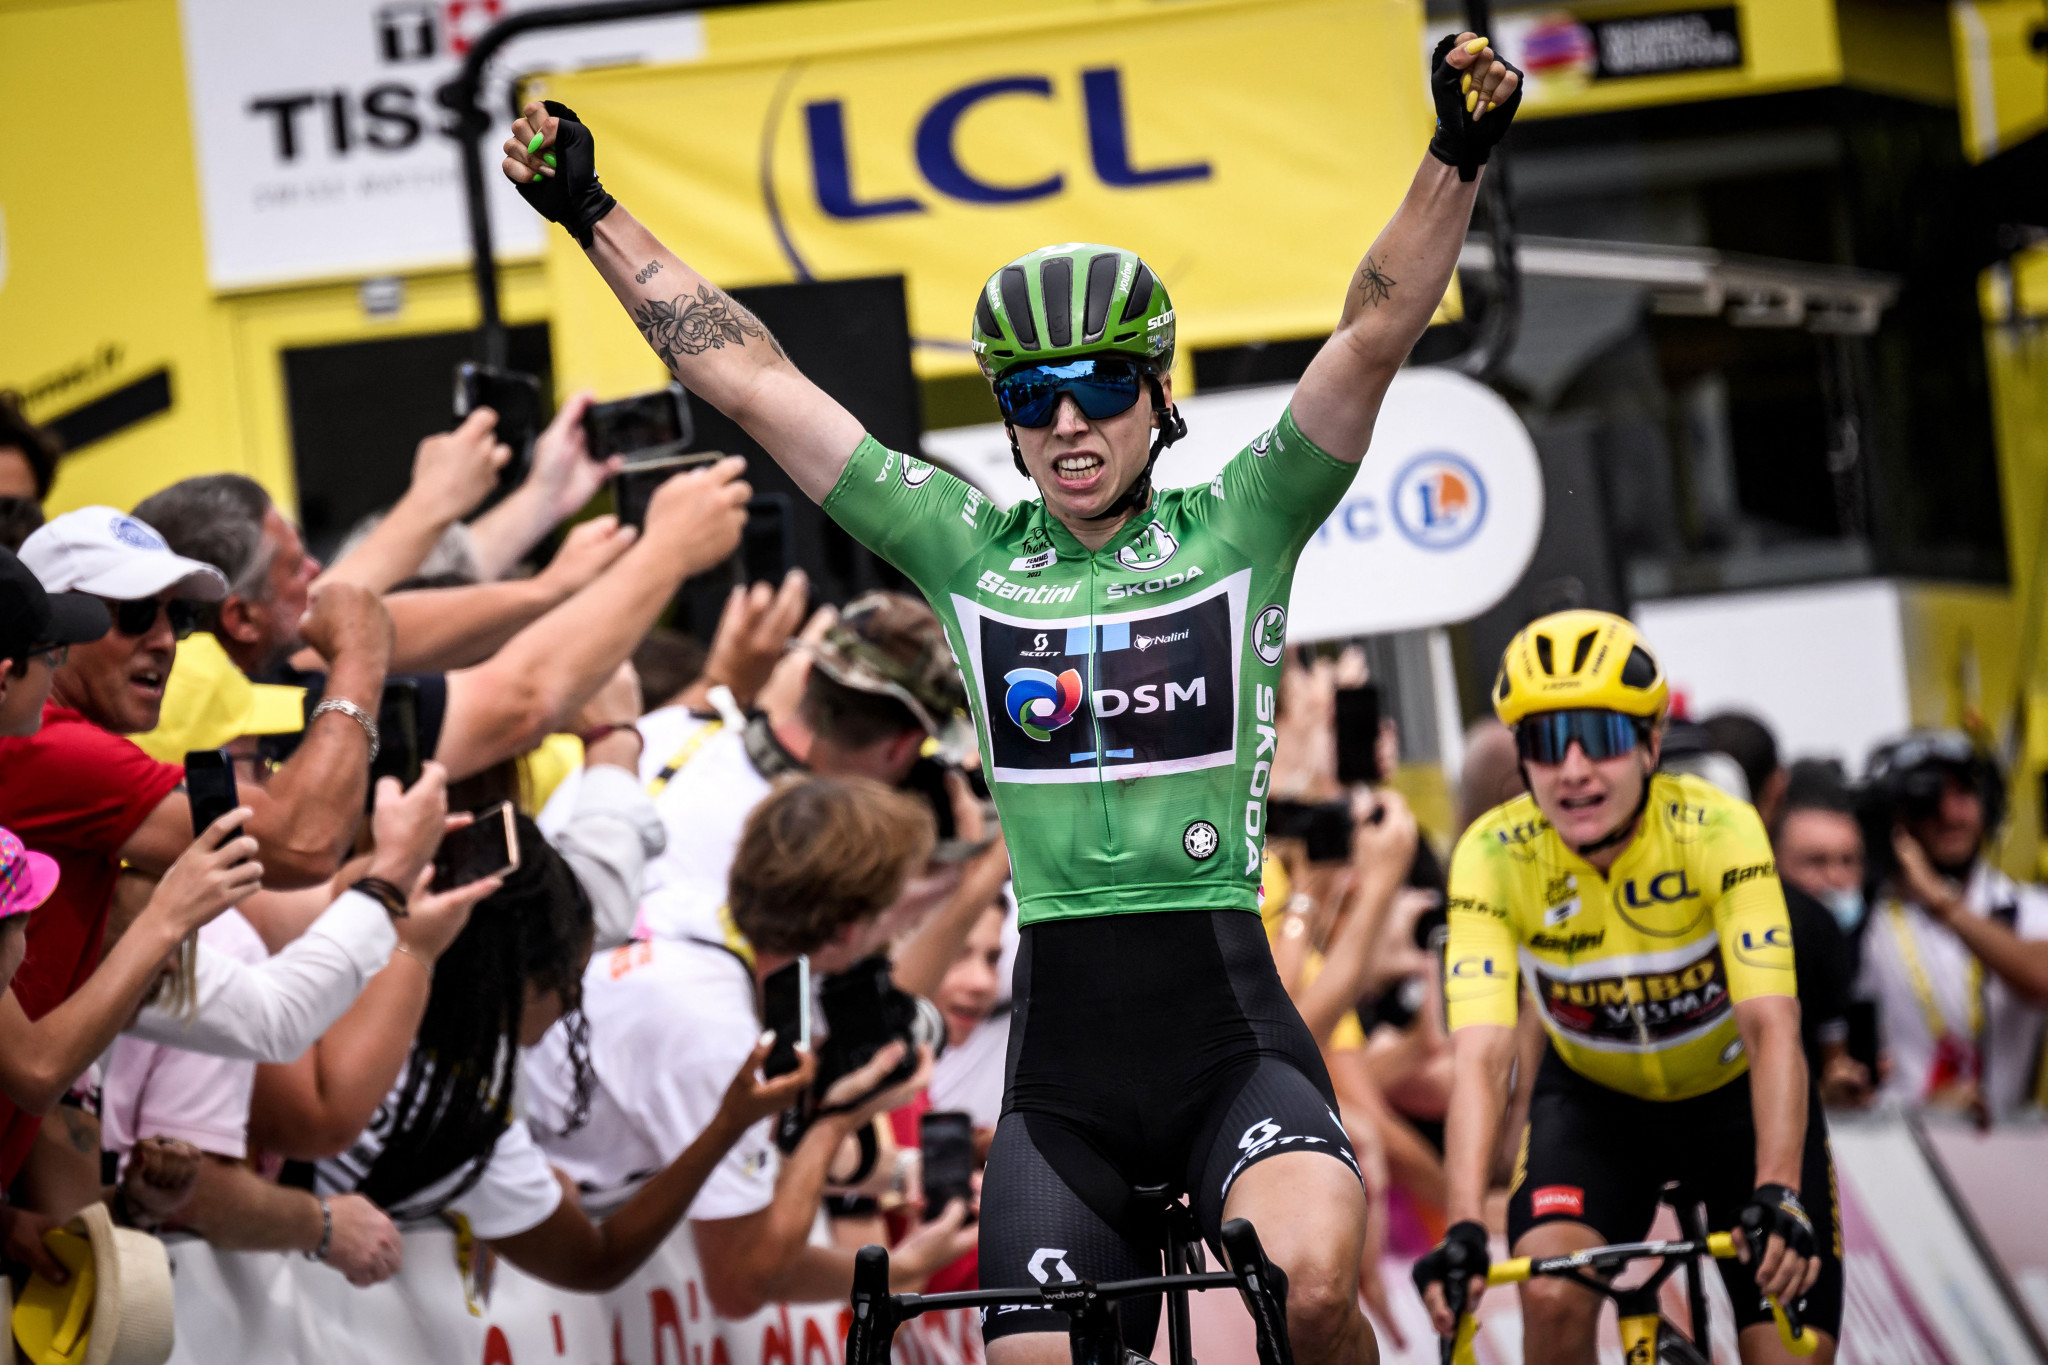 Wiebes wins fifth stage of Tour de France Femmes as Vos retains overall lead